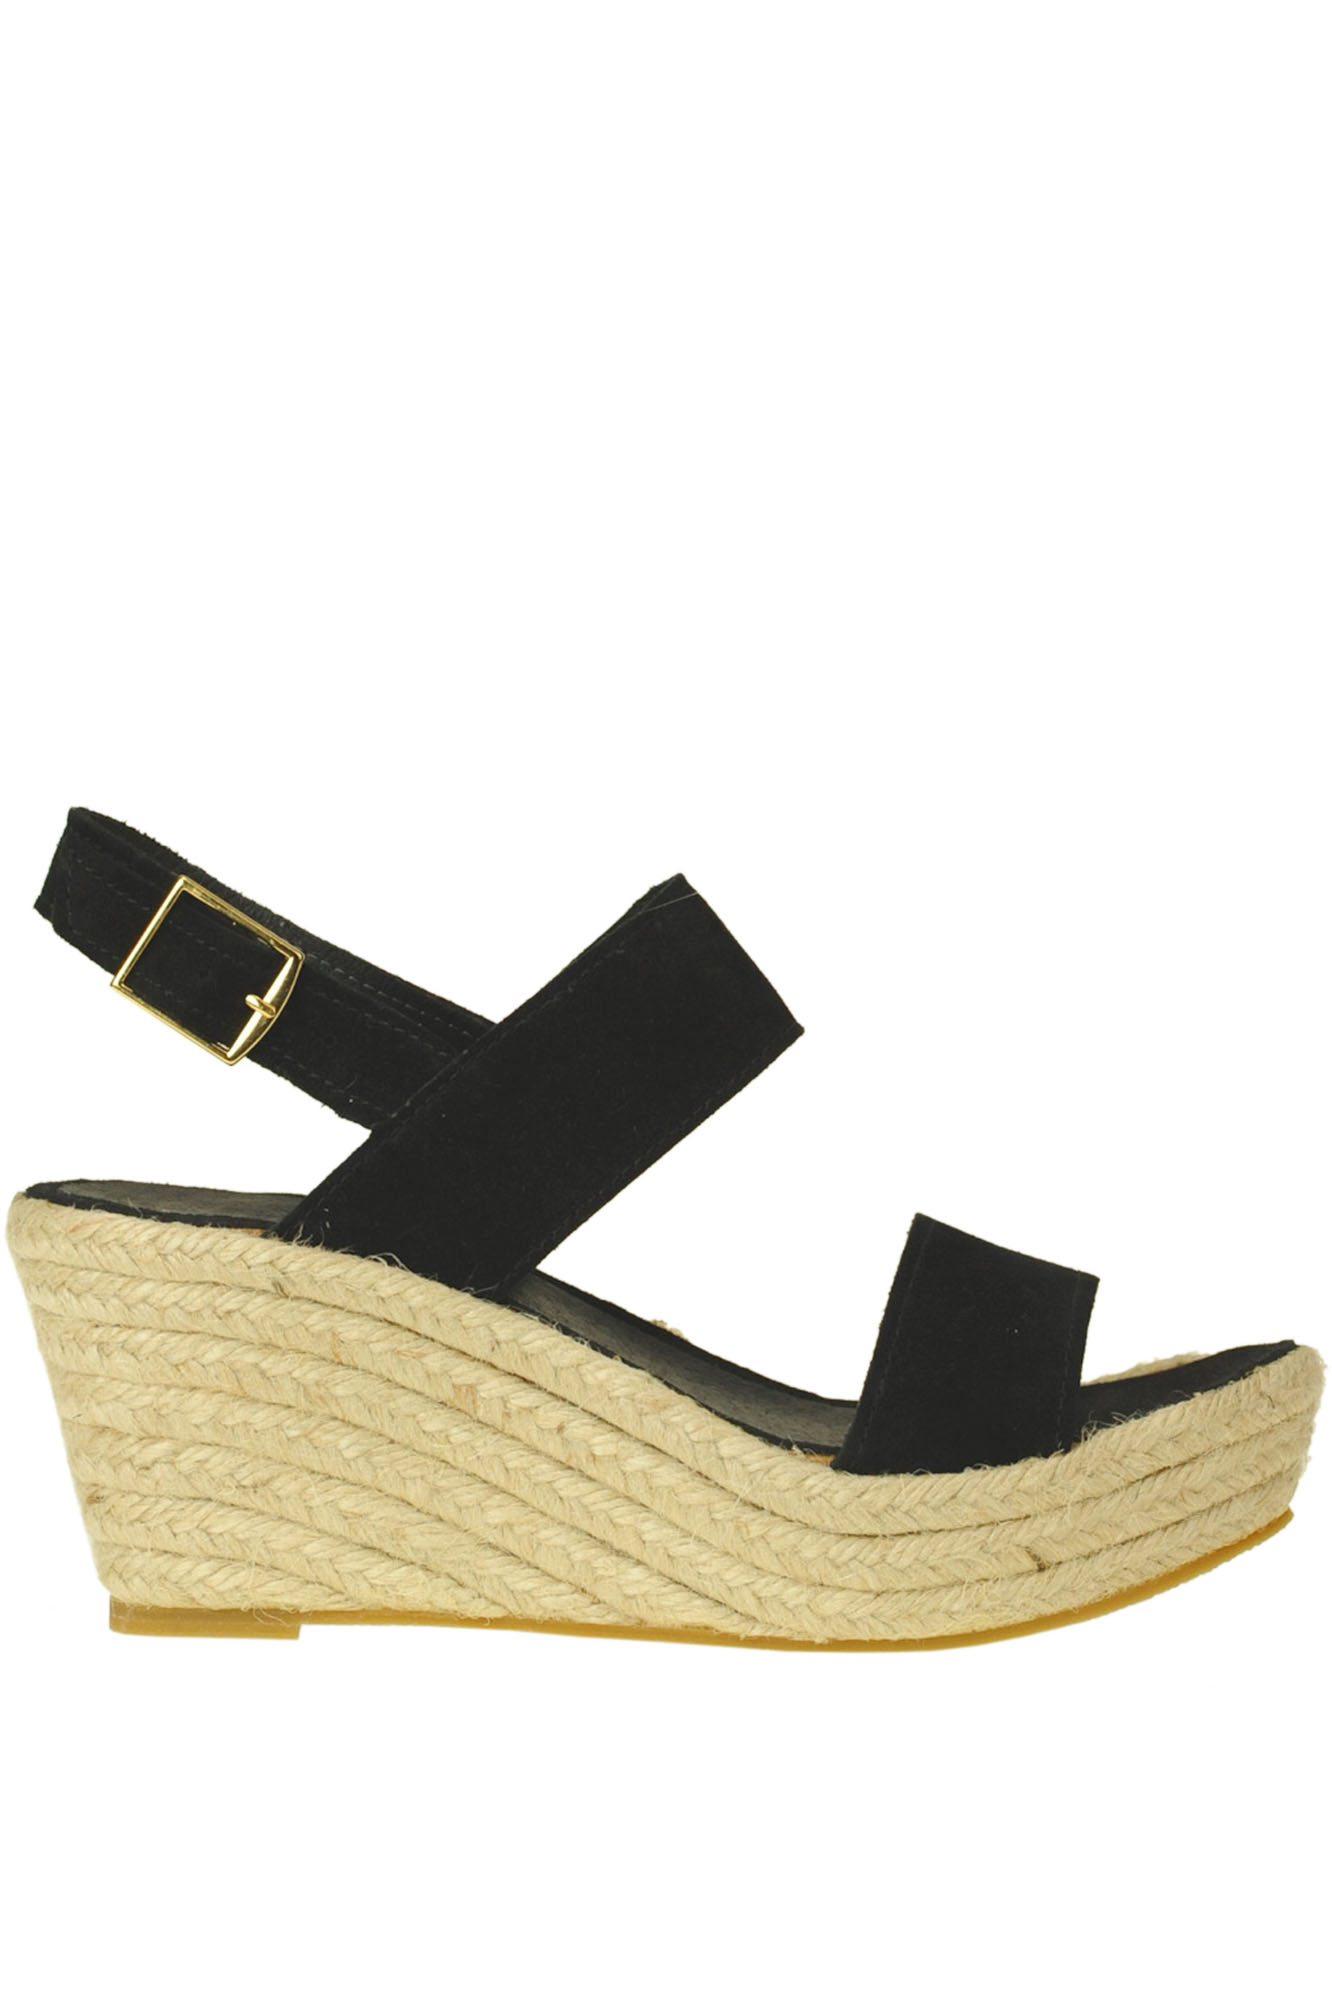 Frenchtrotters Suede Wedge Espadrillas In Black